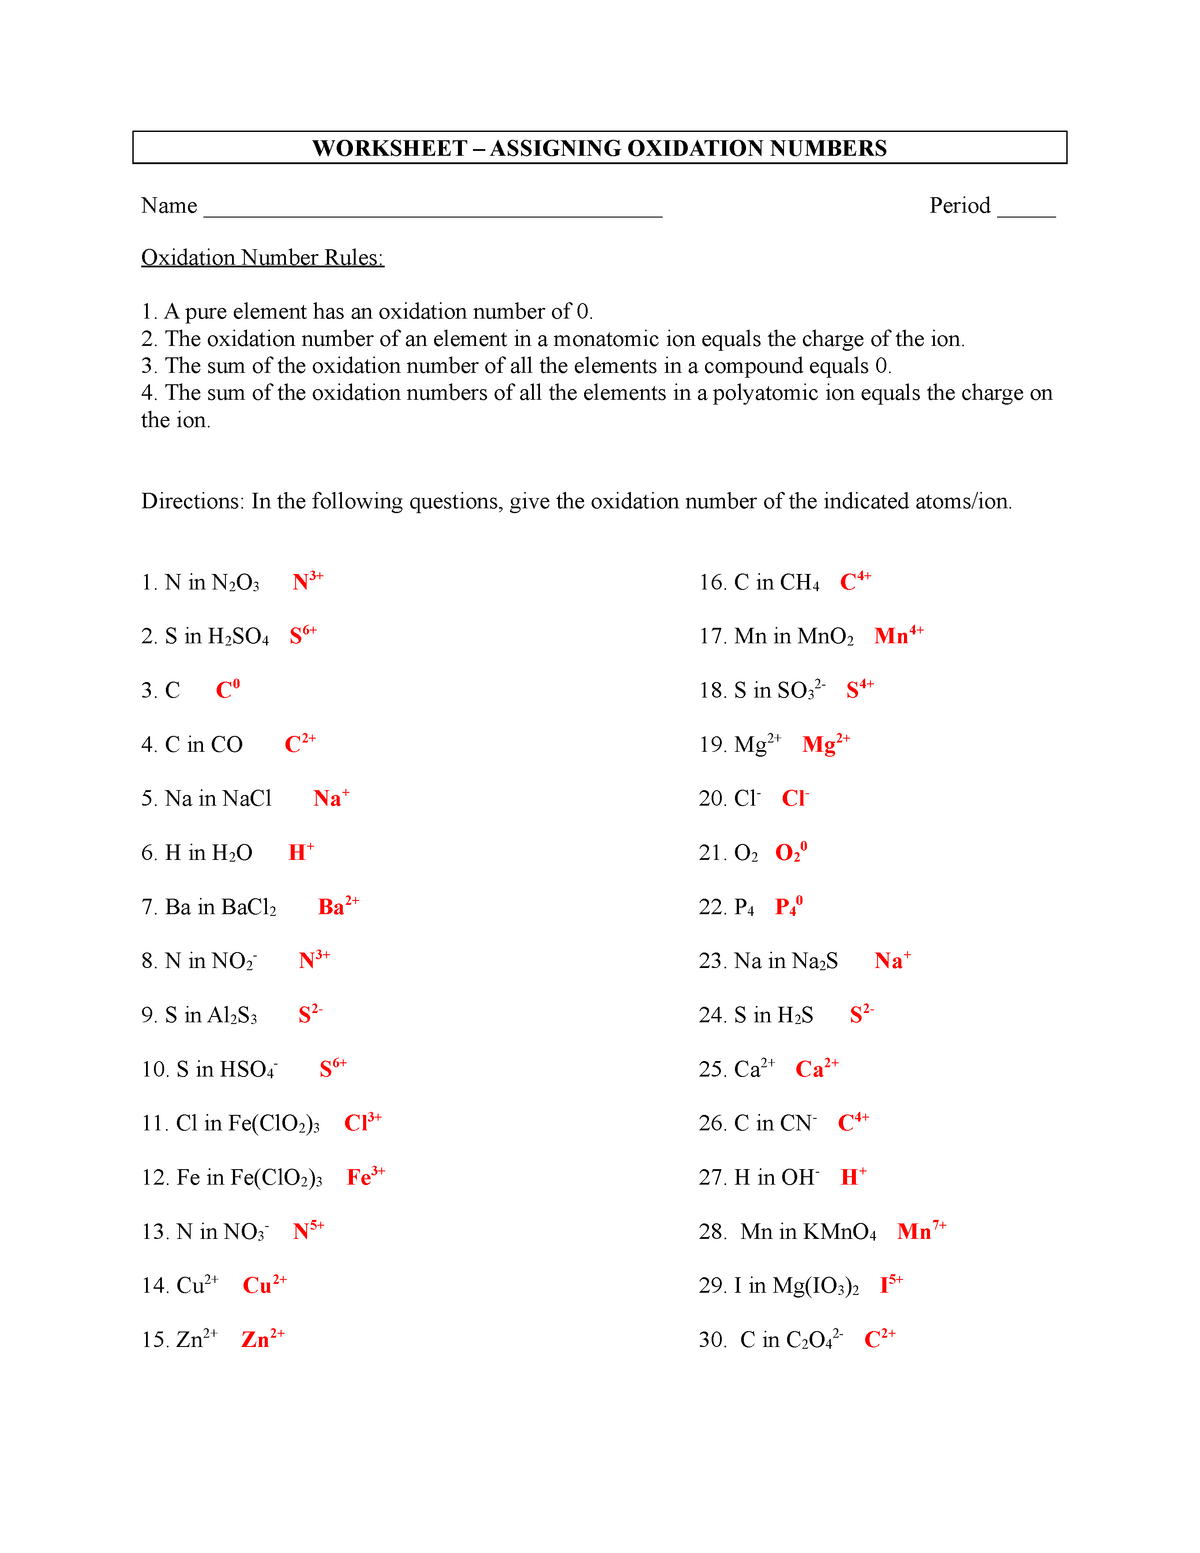 worksheet-assigning-oxidation-numbers-key-worksheet-assigning-oxidation-numbers-name